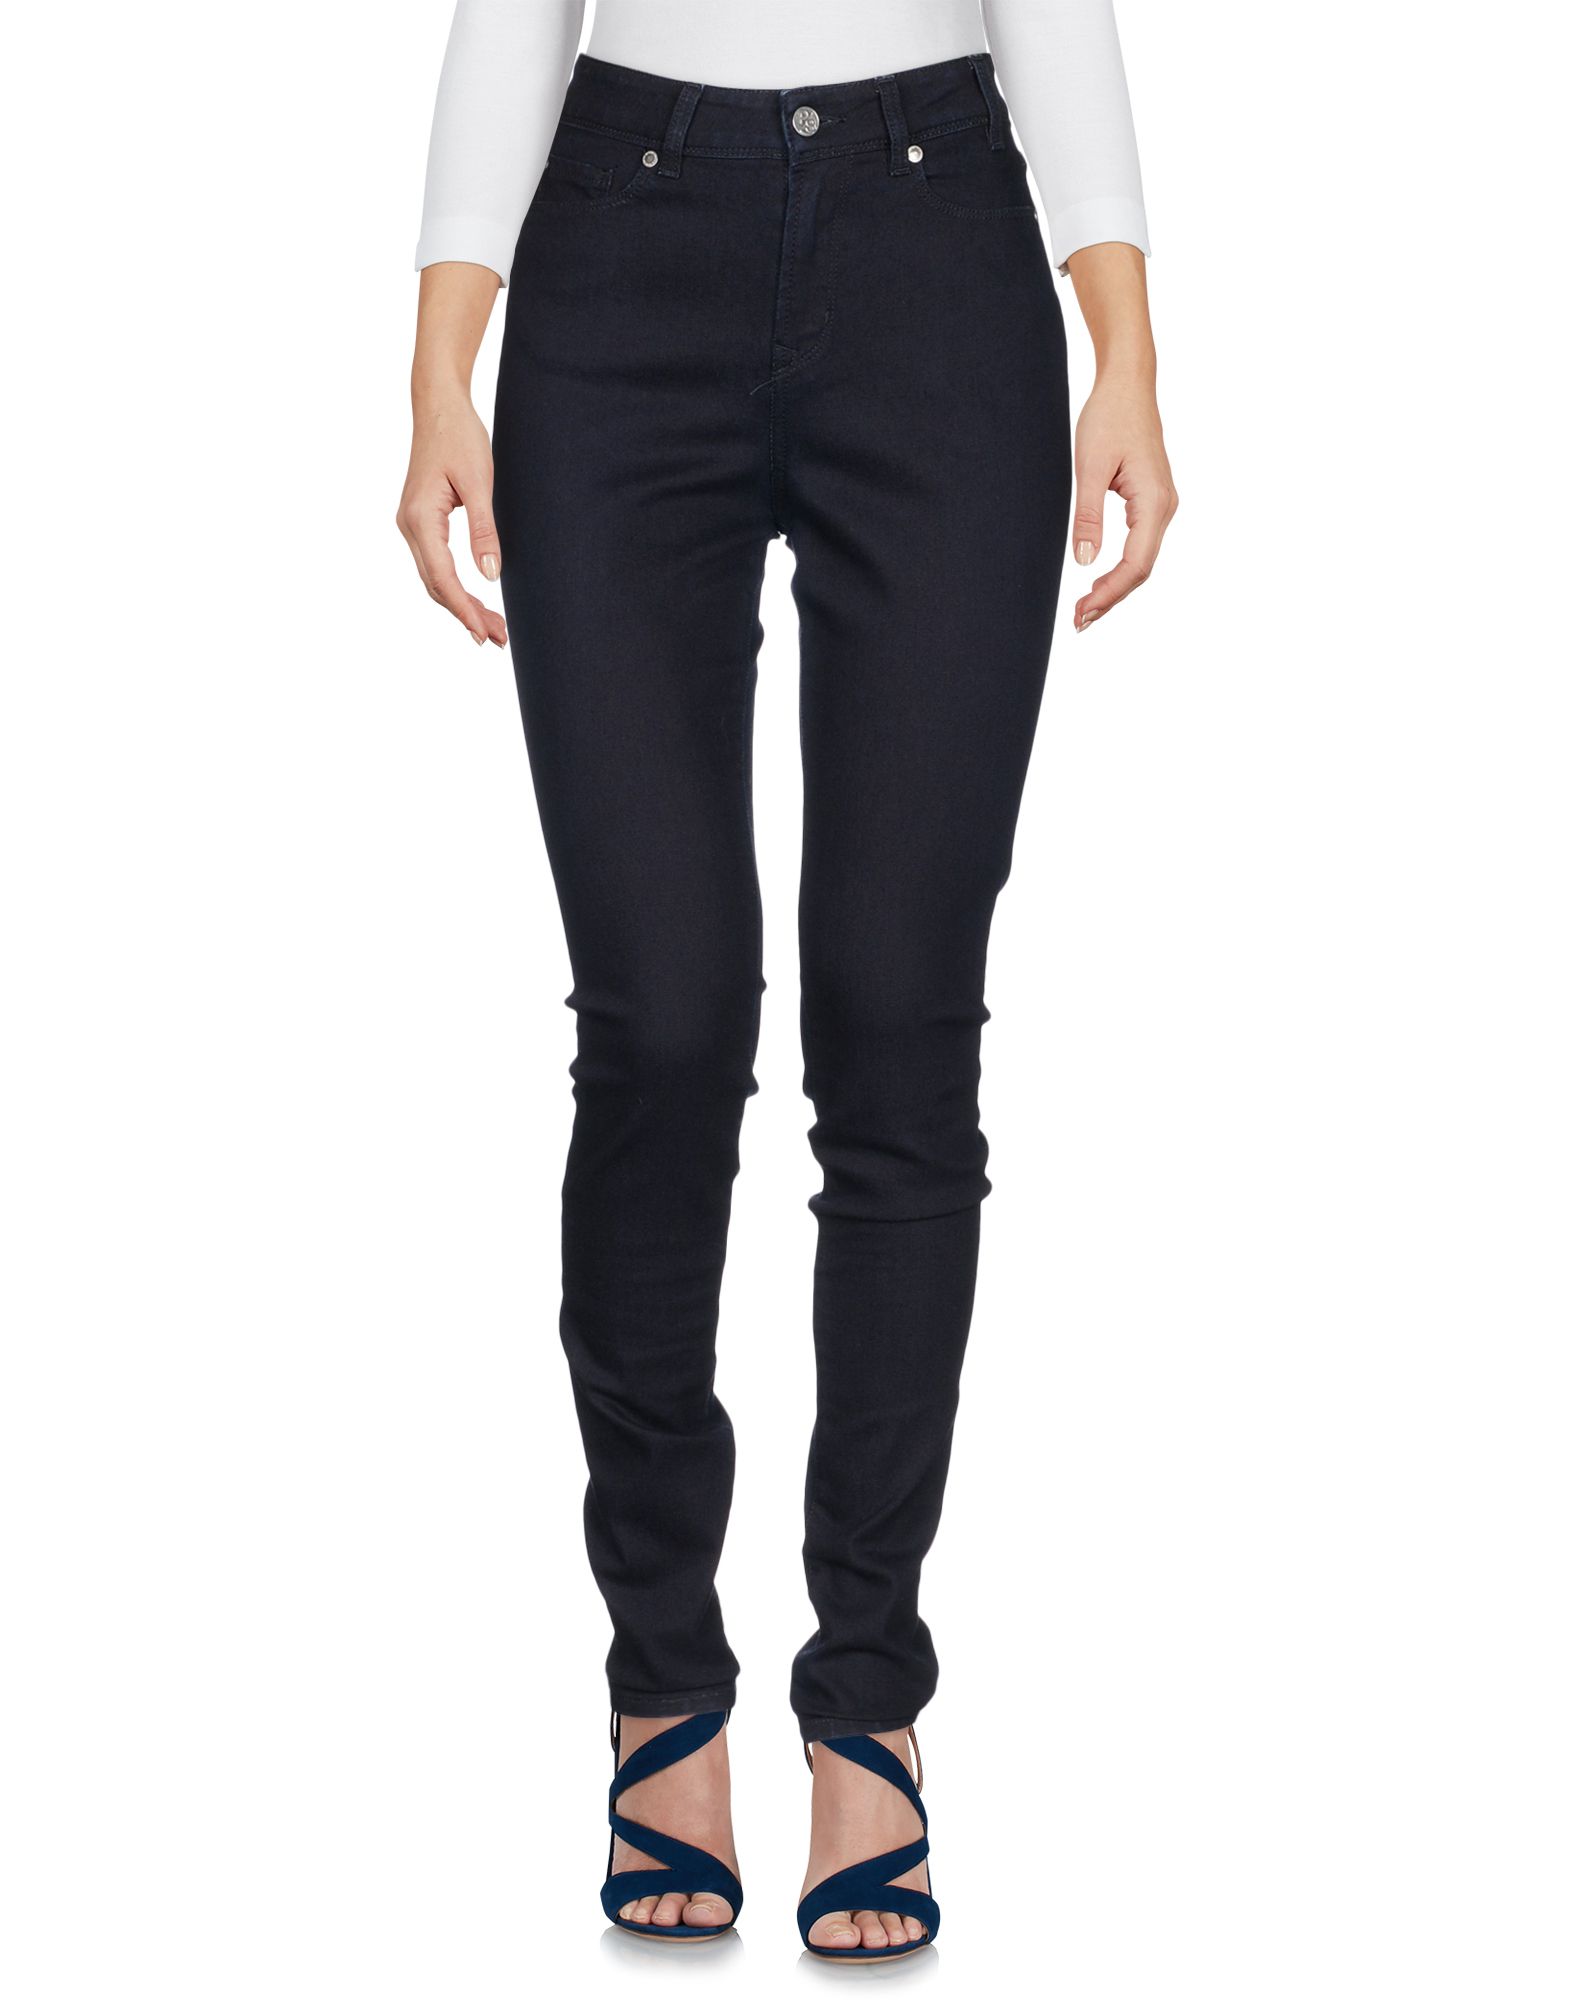 PS BY PAUL SMITH Denim pants,42681672IC 2